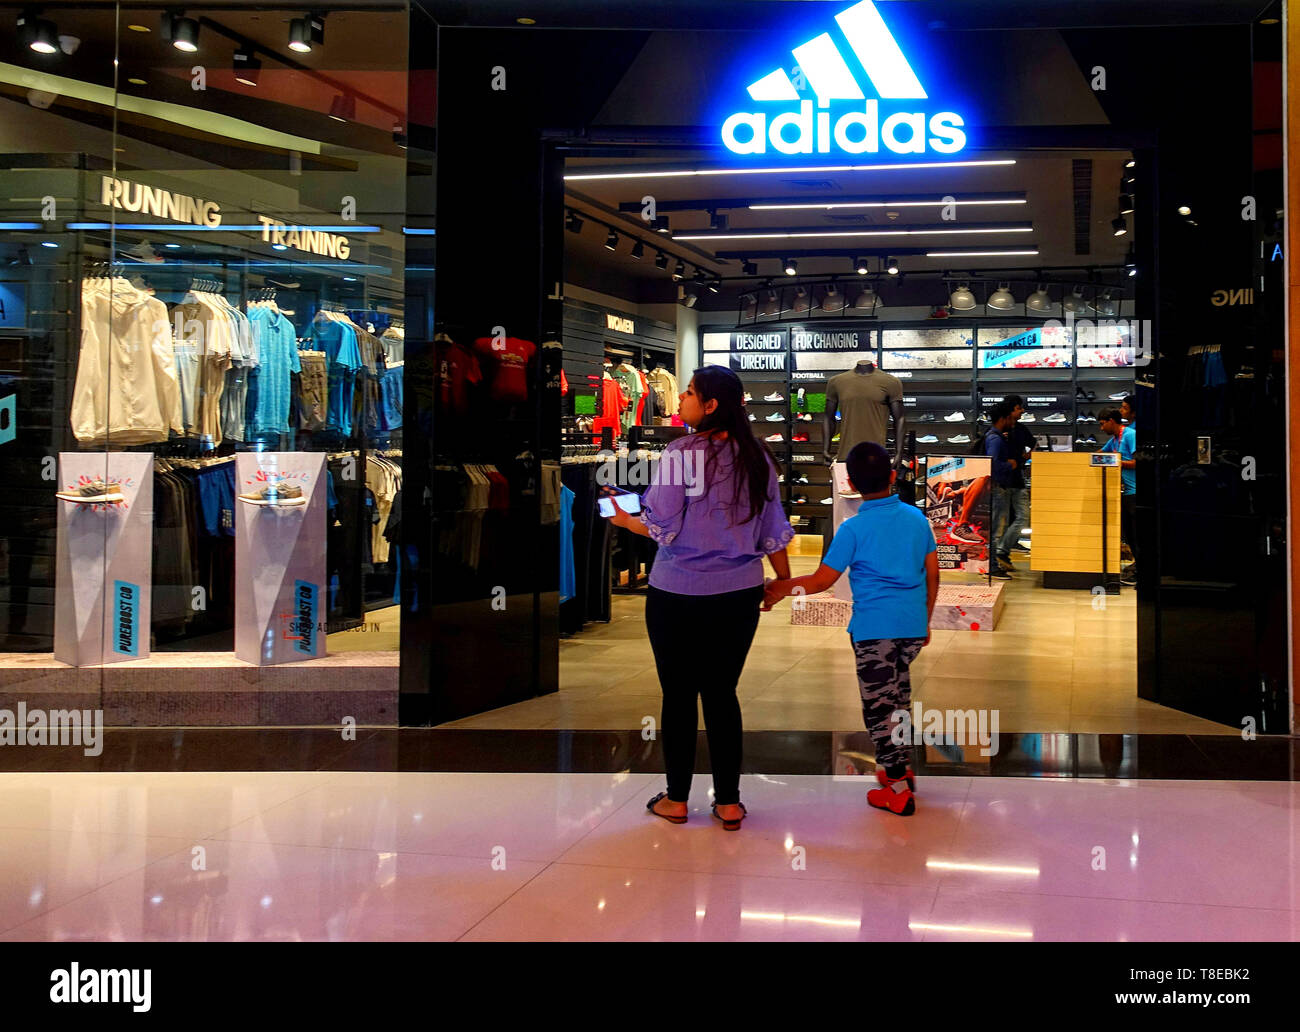 Adidas Store Front High Resolution Stock Photography and Images - Alamy